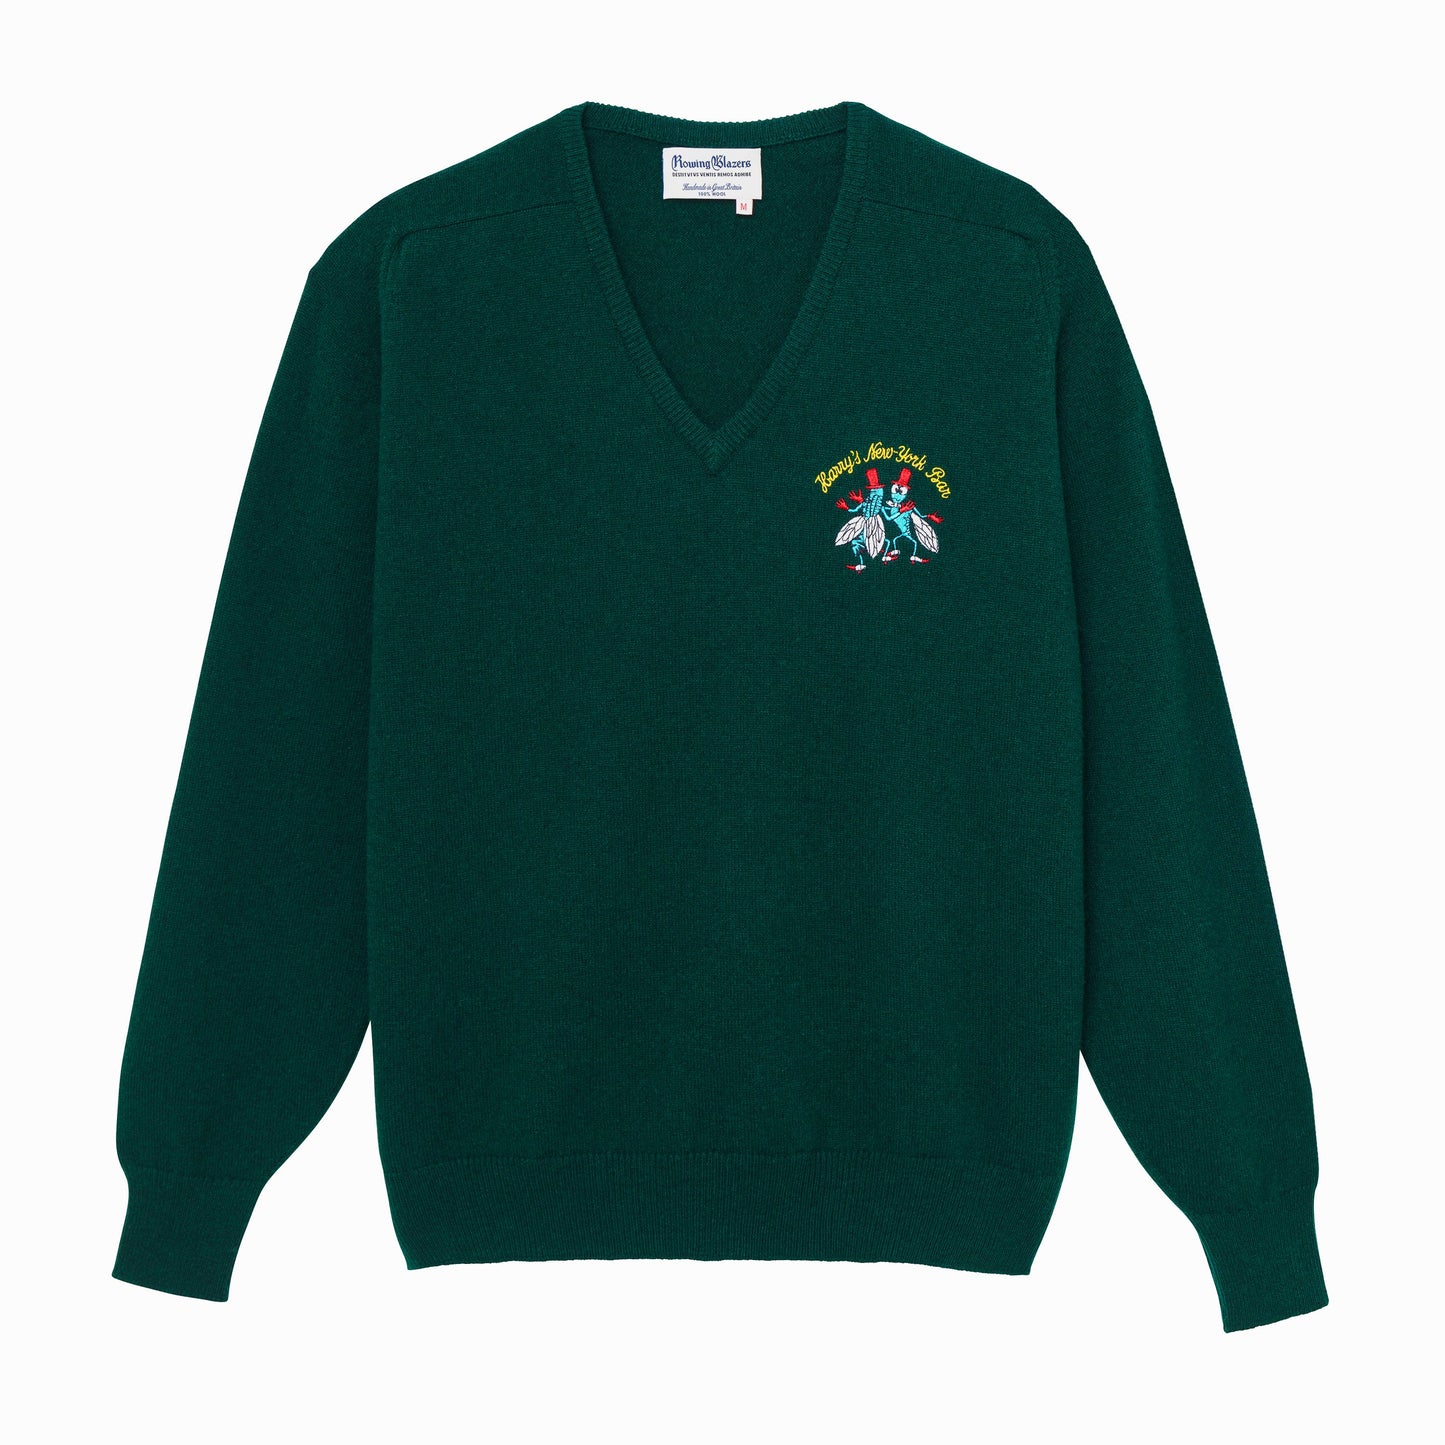 Green sweater emblazoned with Harry's famous bar flies motif. 